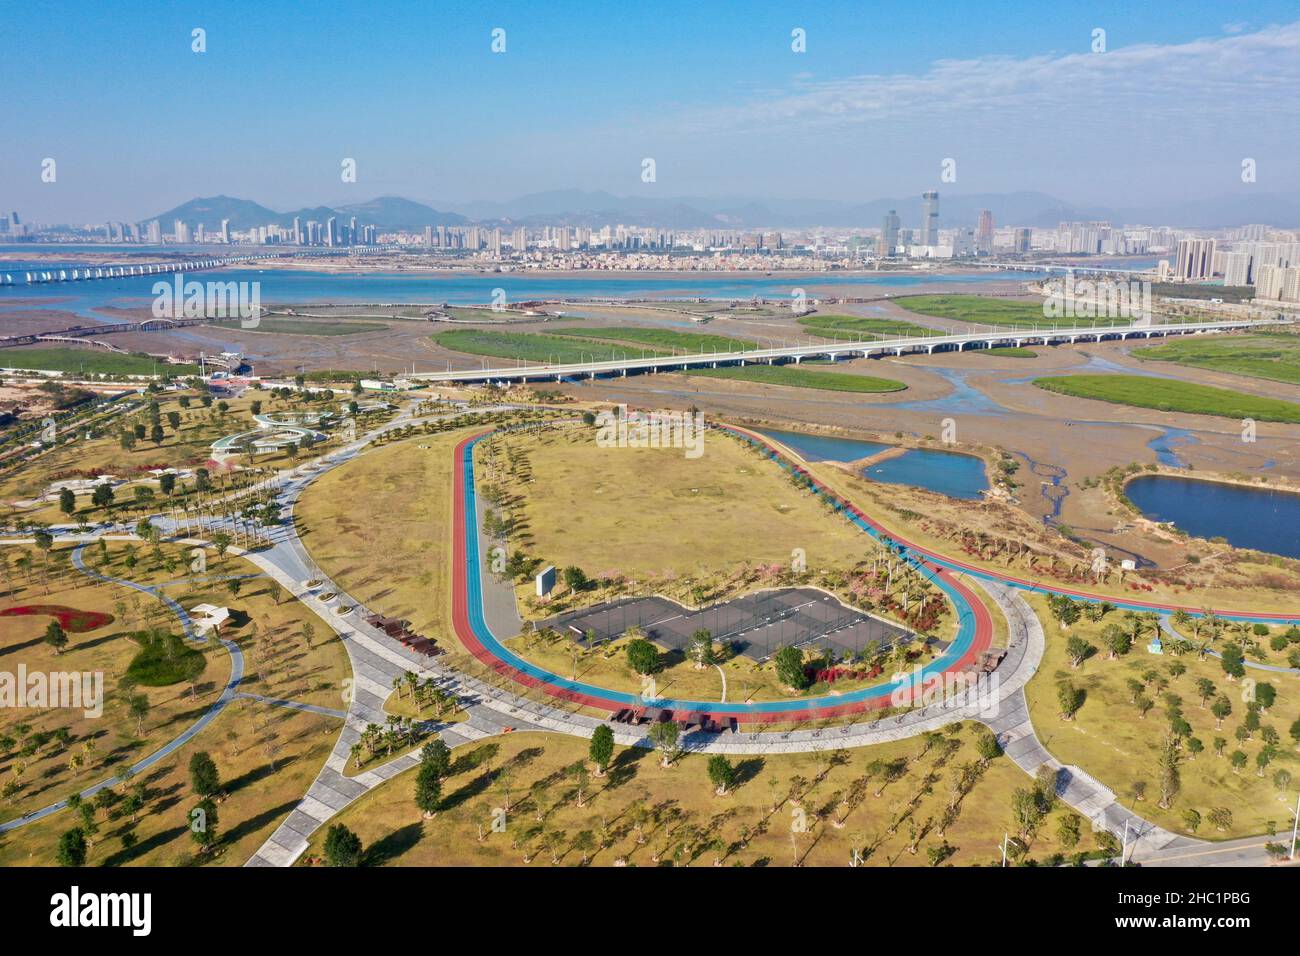 (211221) -- XIAMEN, Dec. 21, 2021 (Xinhua) -- Aerial photo taken on Dec. 8, 2021 shows the view of a park and a wetland in Xiang'an District of Xiamen, southeast China's Fujian Province. This year marks the 40th anniversary of the establishment of the Xiamen Special Economic Zone (SEZ). The Xiamen SEZ has made important contributions to the country's reform, opening up, and socialist modernization, and played a unique role in promoting national reunification. (Xinhua/Jiang Kehong) Stock Photo